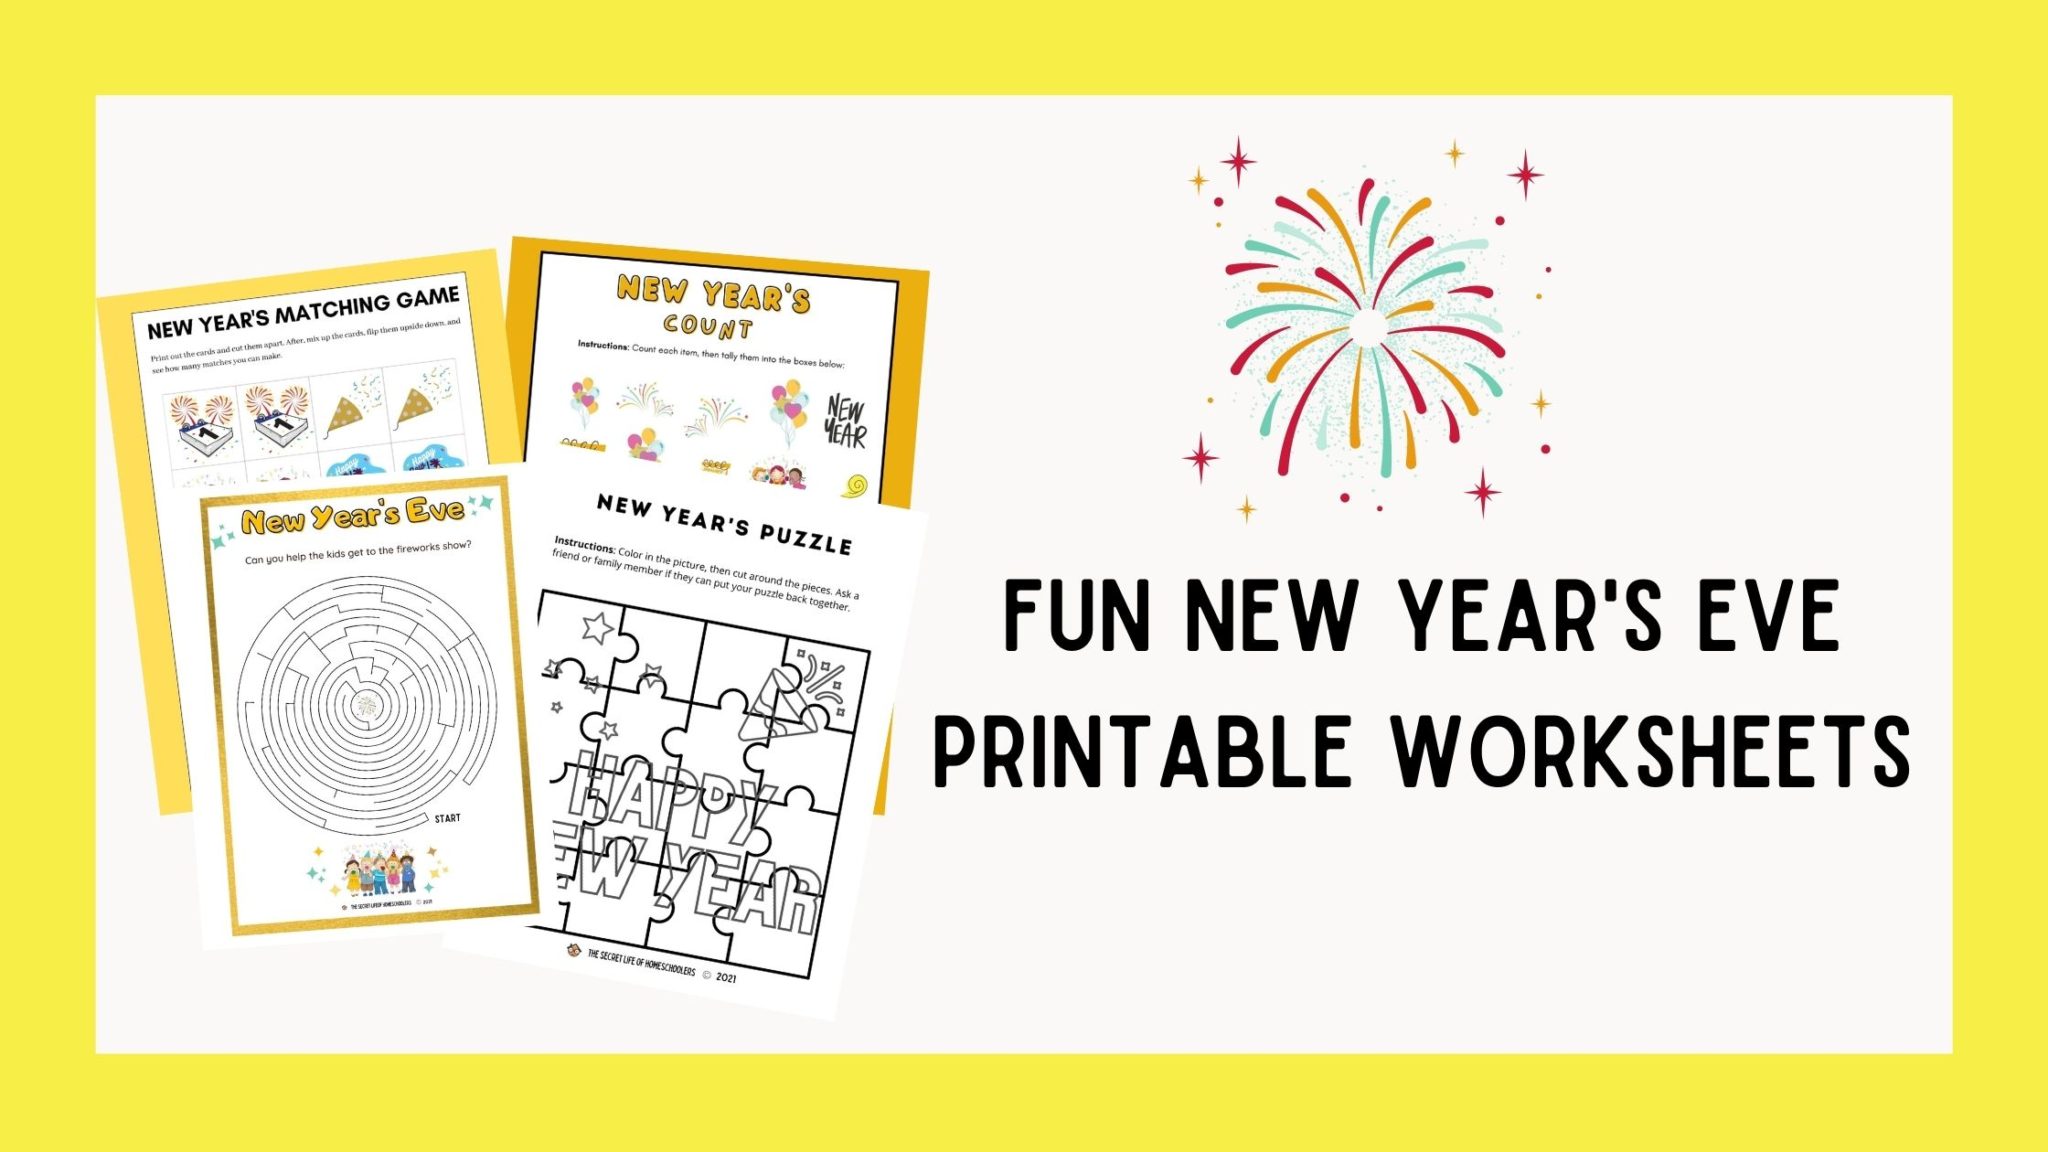 You are currently viewing Fun New Year’s Eve Printable Worksheets for Kids